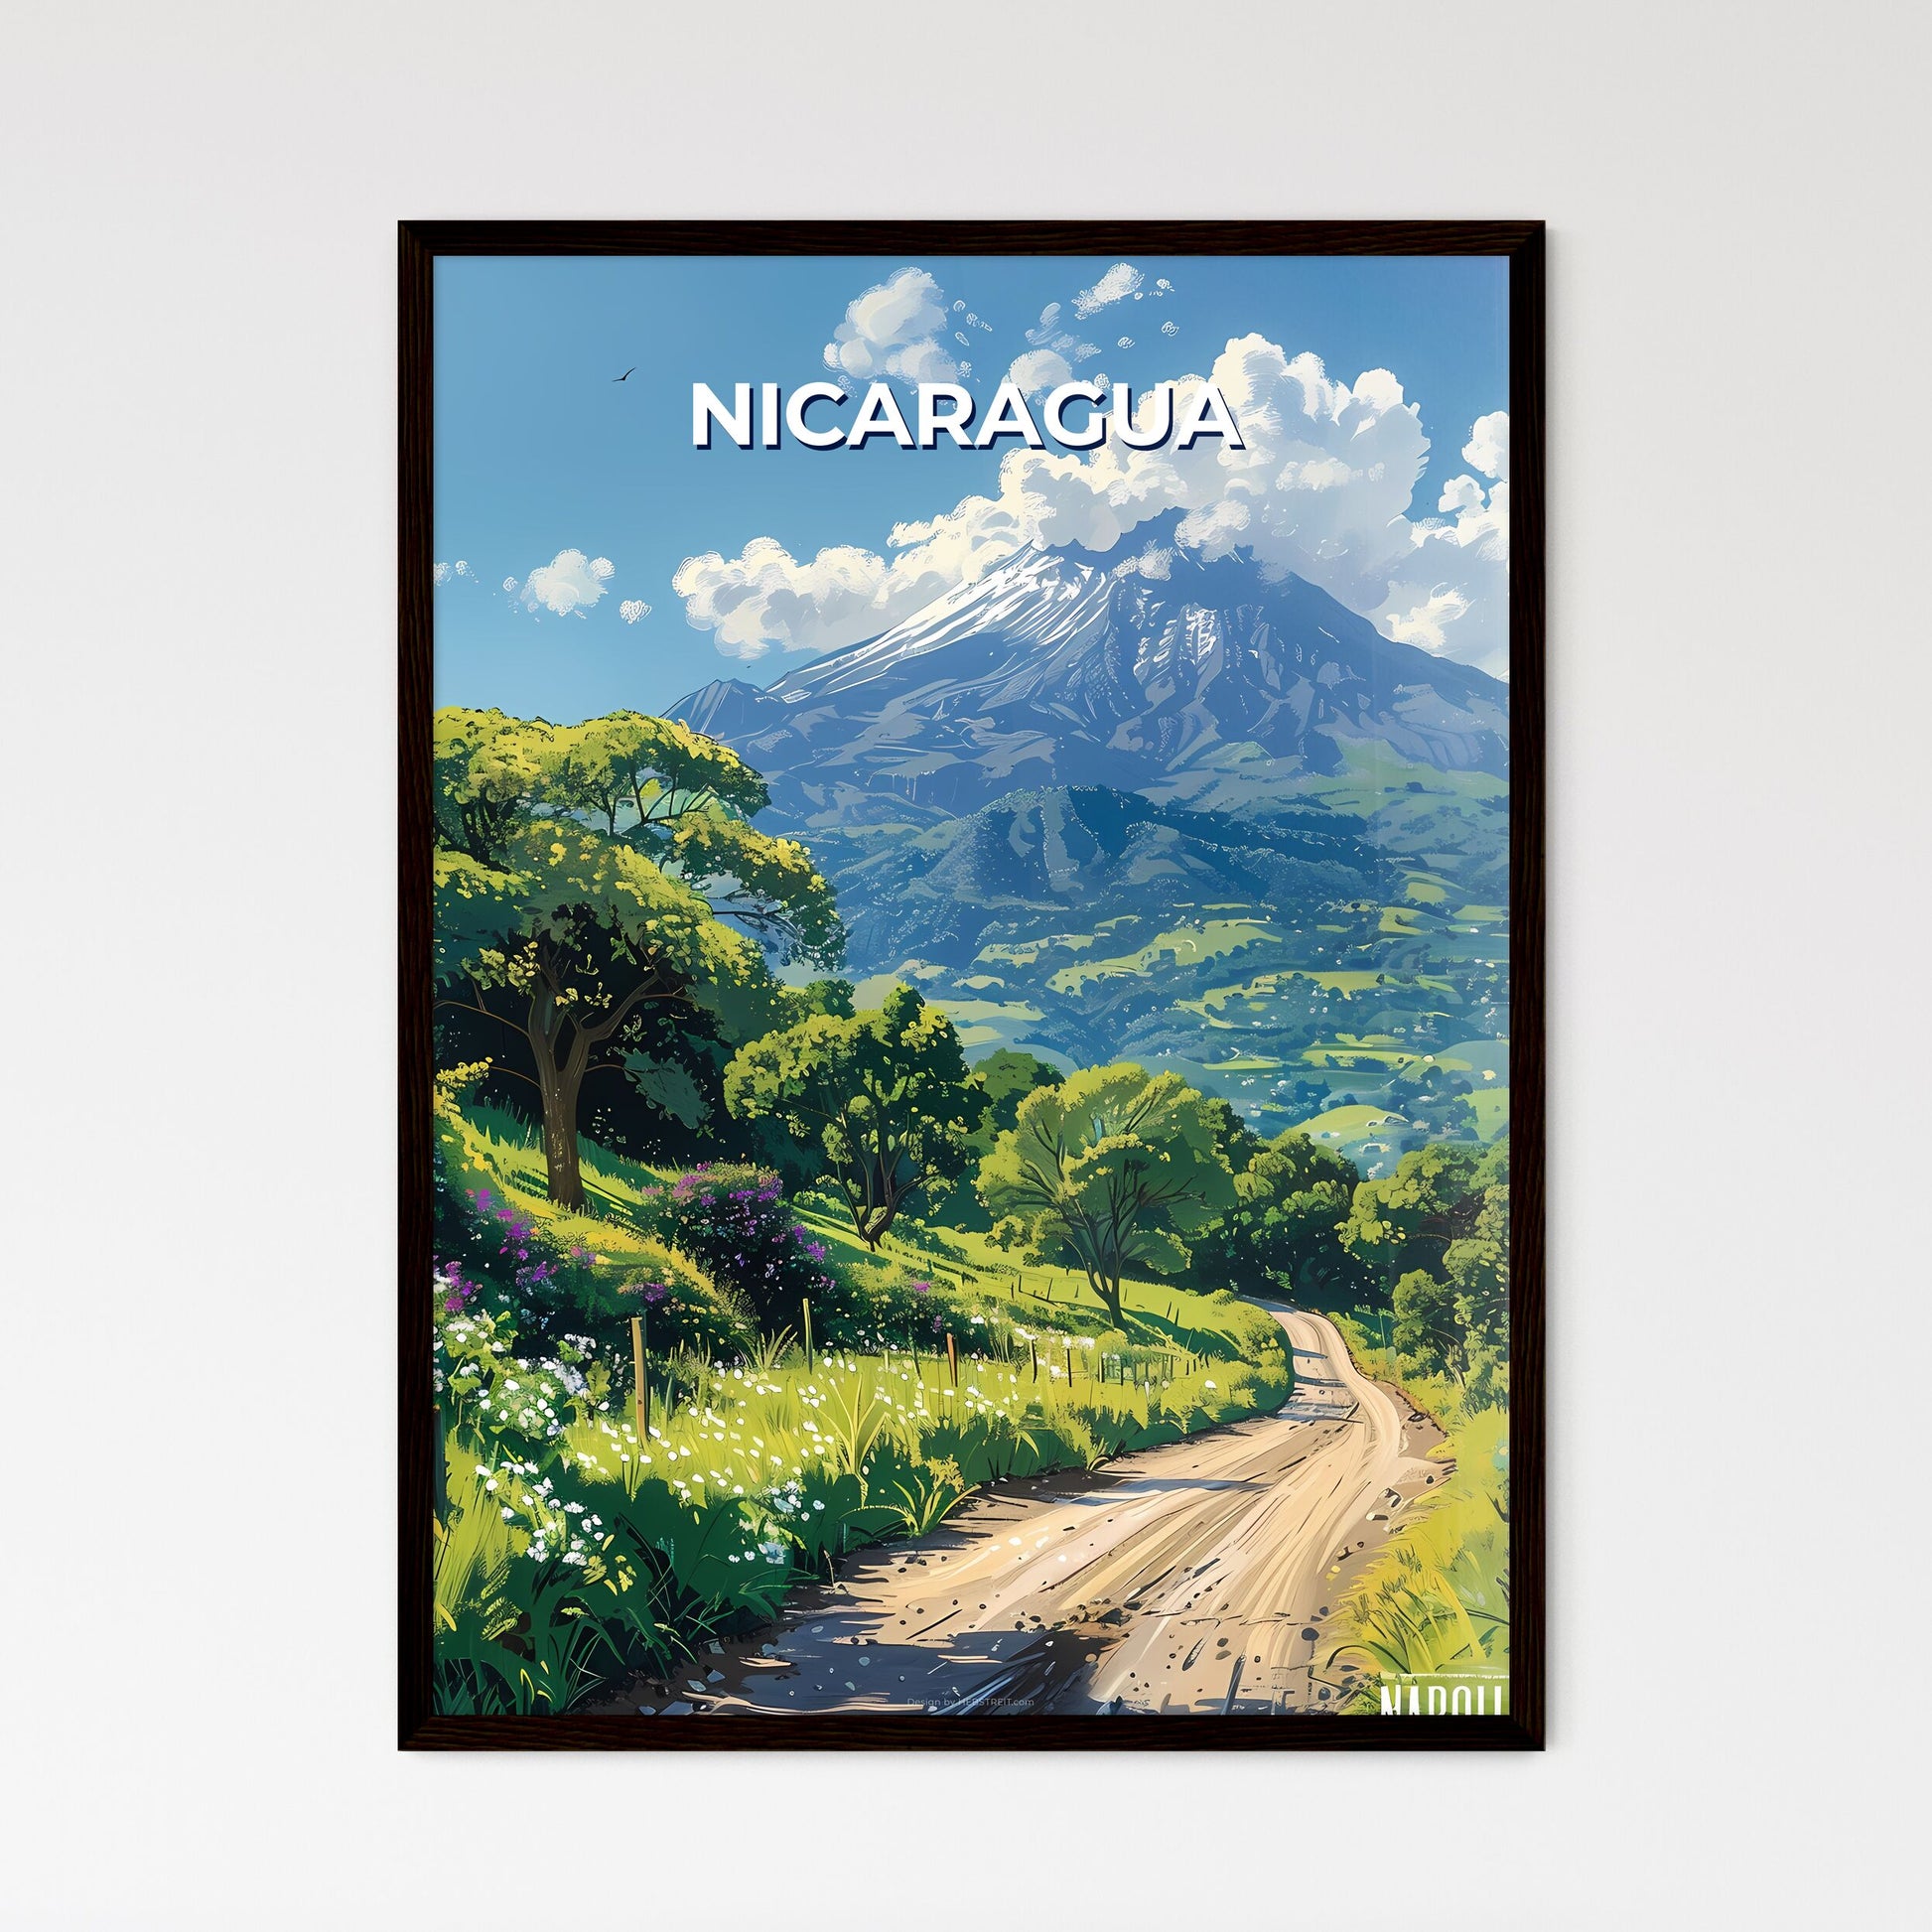 Artistic Landscape Painting of Nicaragua, North America: Mountain, Valley, Dirt Road, Vibrant Colors